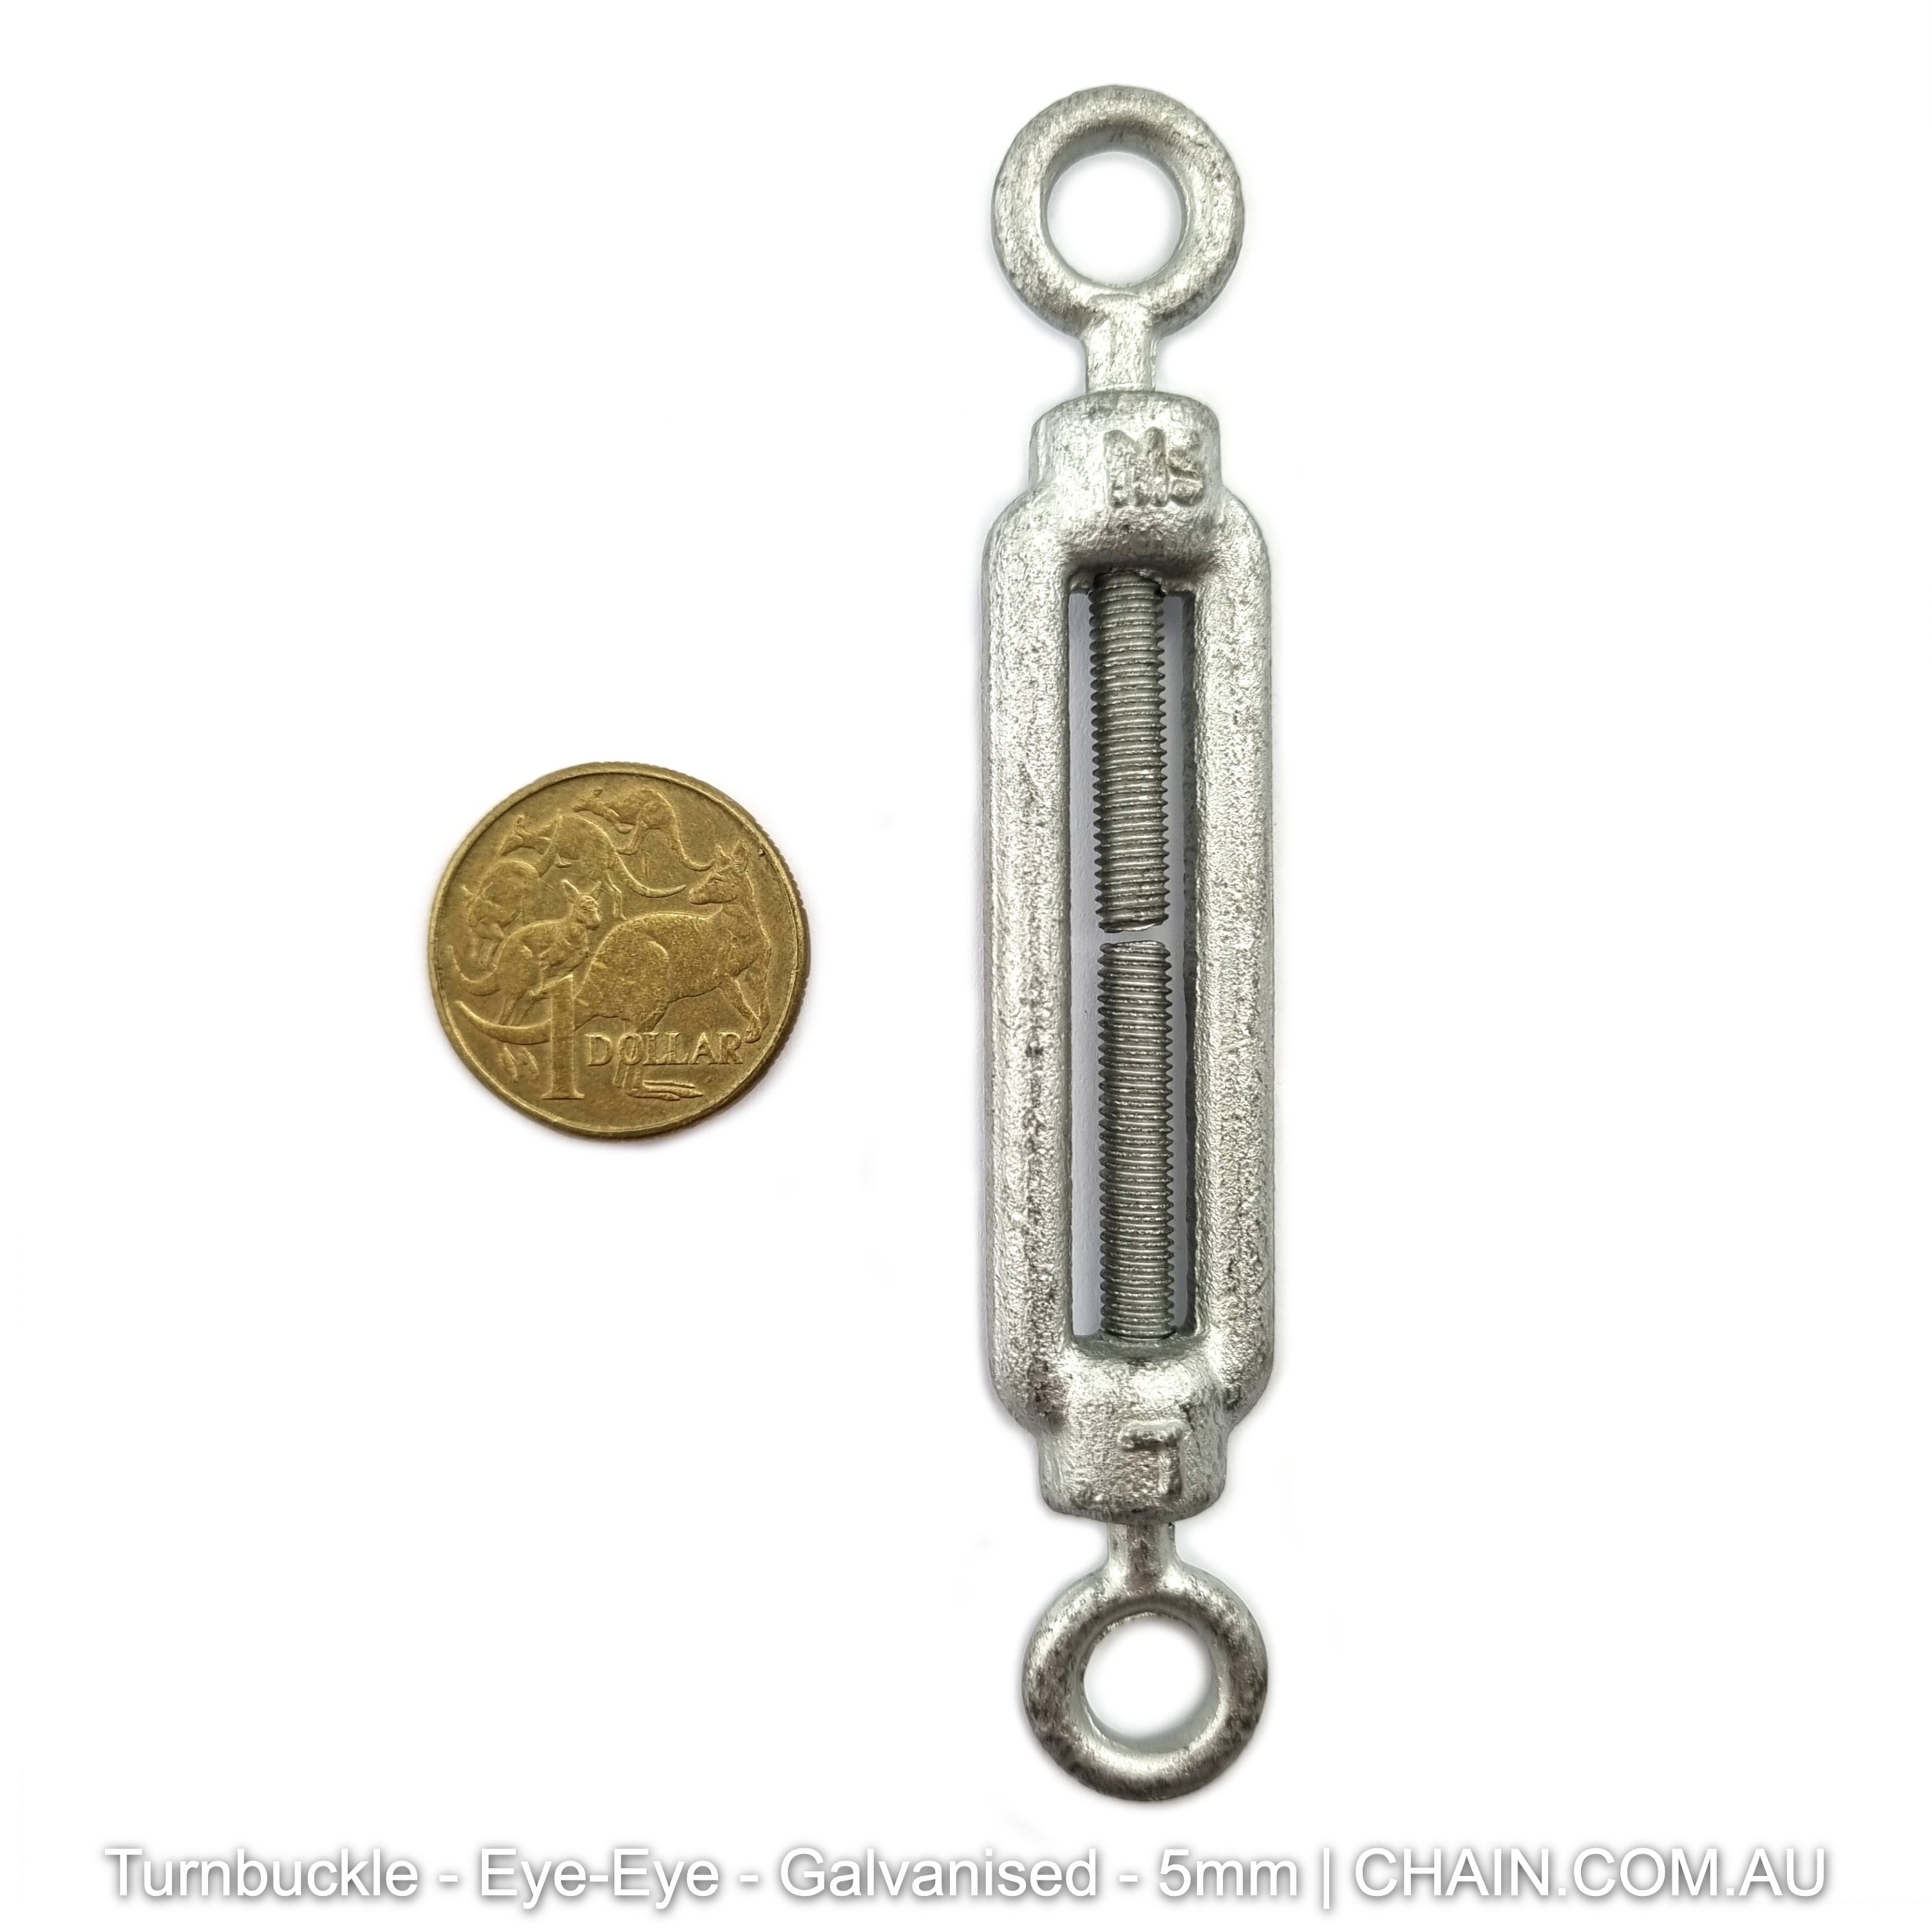 5mm Eye-Eye Turnbuckle Galvanised. Shop hardware online chain.com.au. Australia wide delivery & Melbourne click & collect.